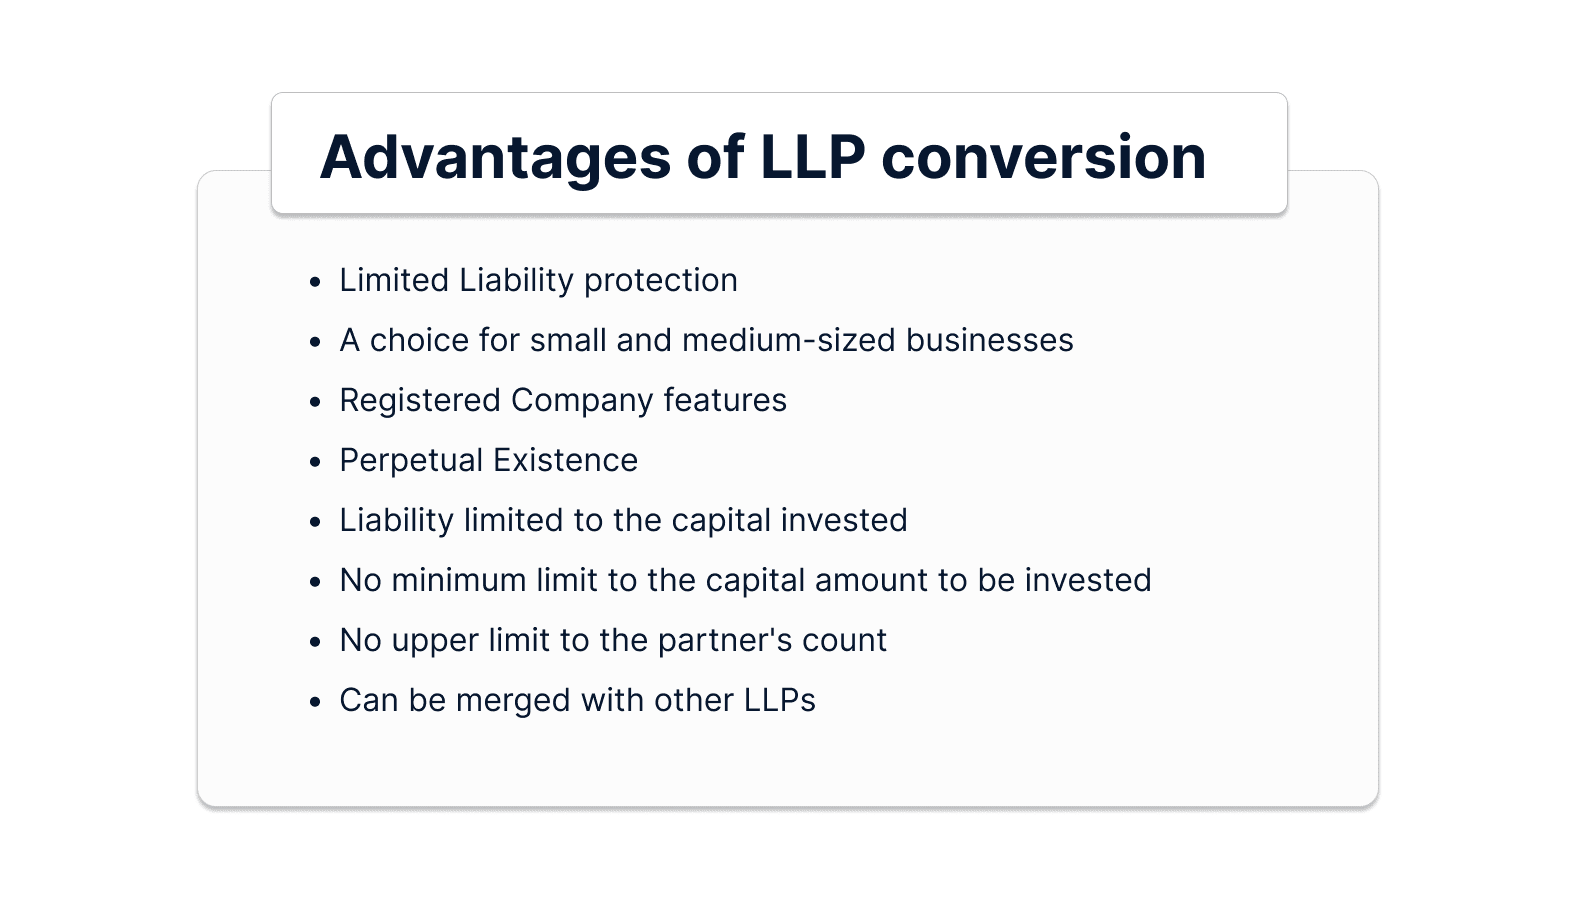 Advantages of converting to an LLP